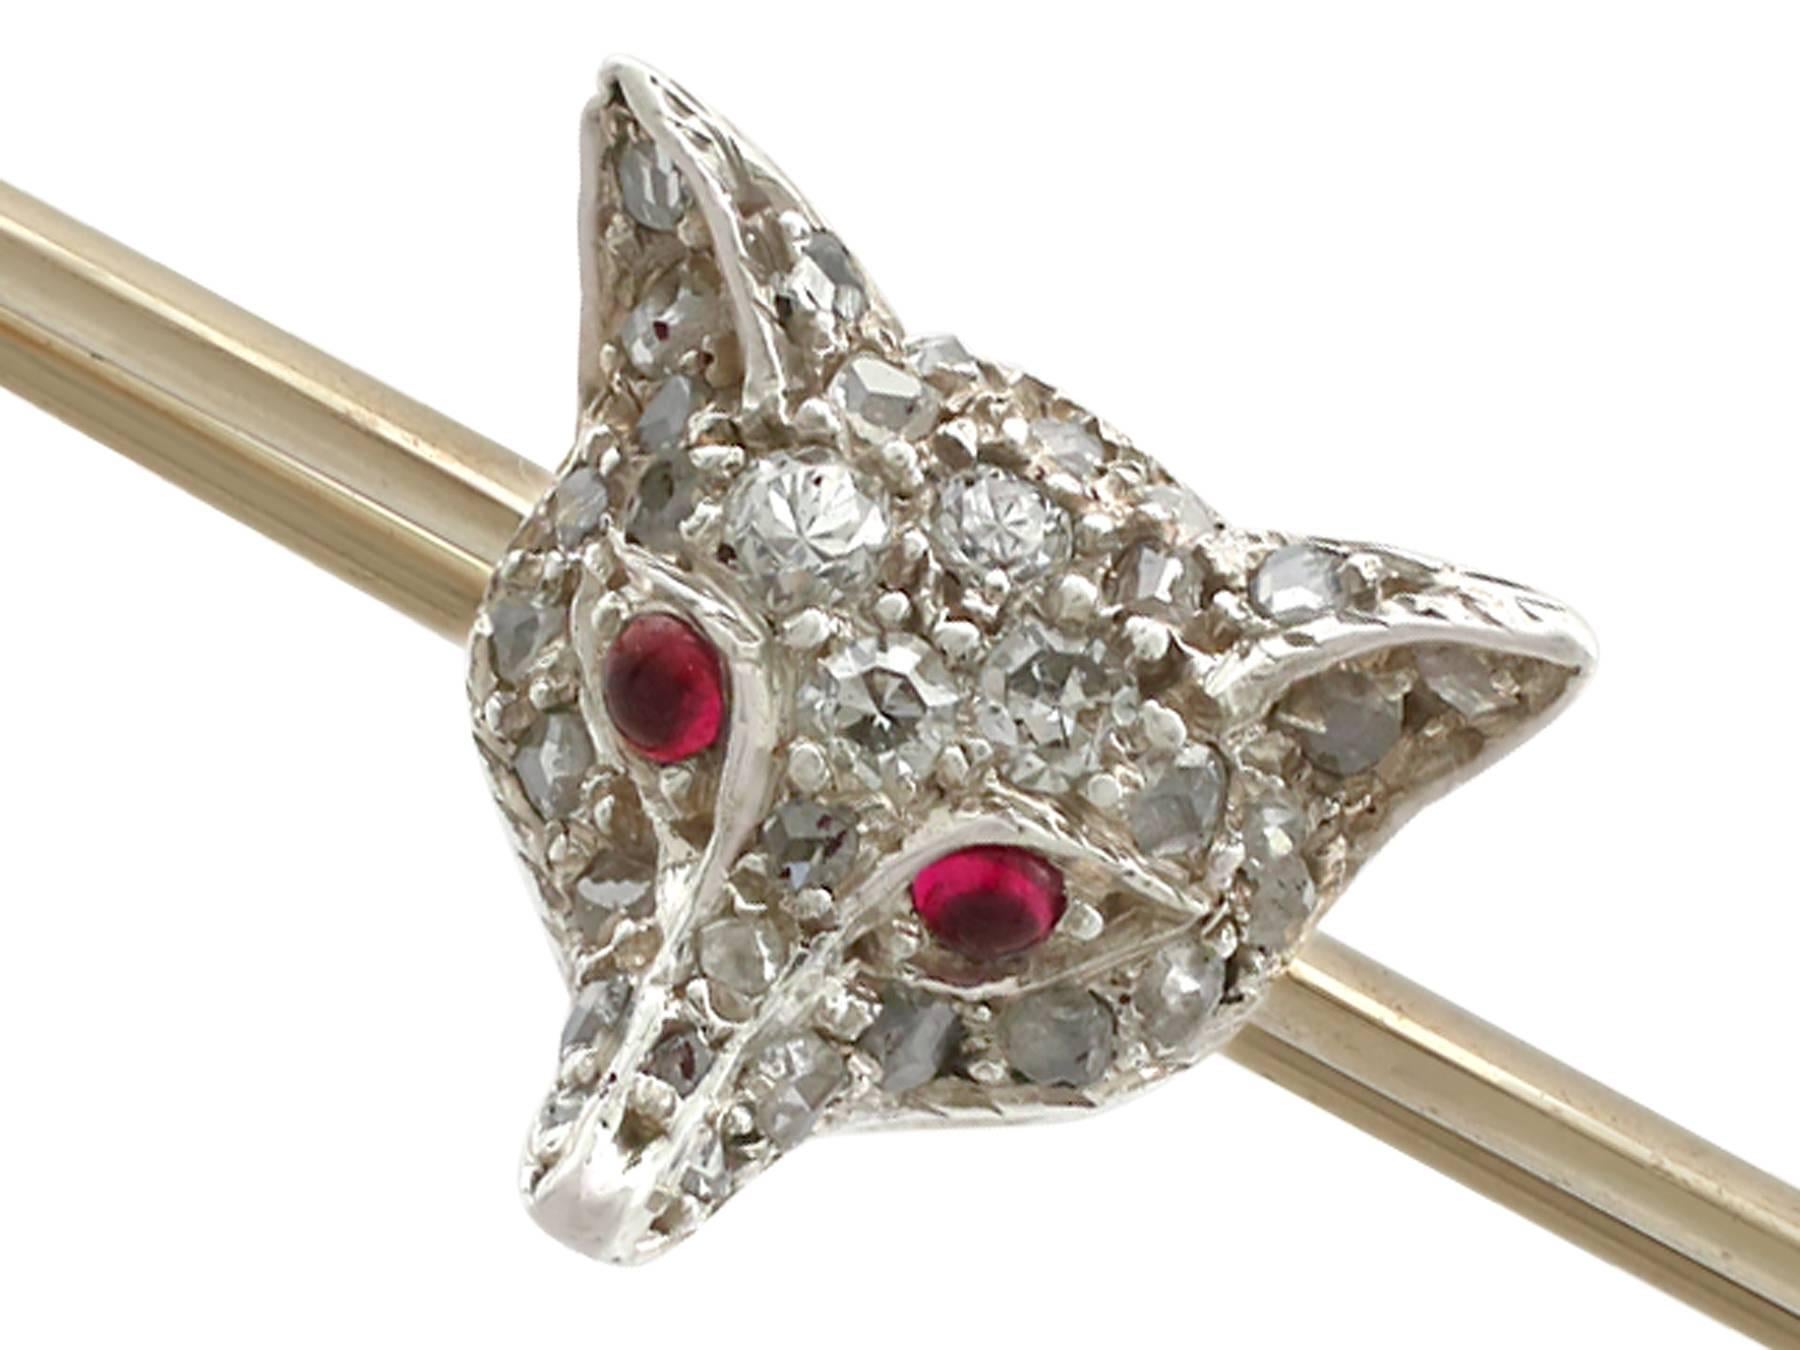 An impressive Victorian 0.28 carat diamond and 0.04 carat ruby, 9 karat yellow gold and silver set 'fox' bar brooch; part of our diverse antique jewelry collections

This fine and impressive antique Victorian brooch has been crafted in 9k yellow